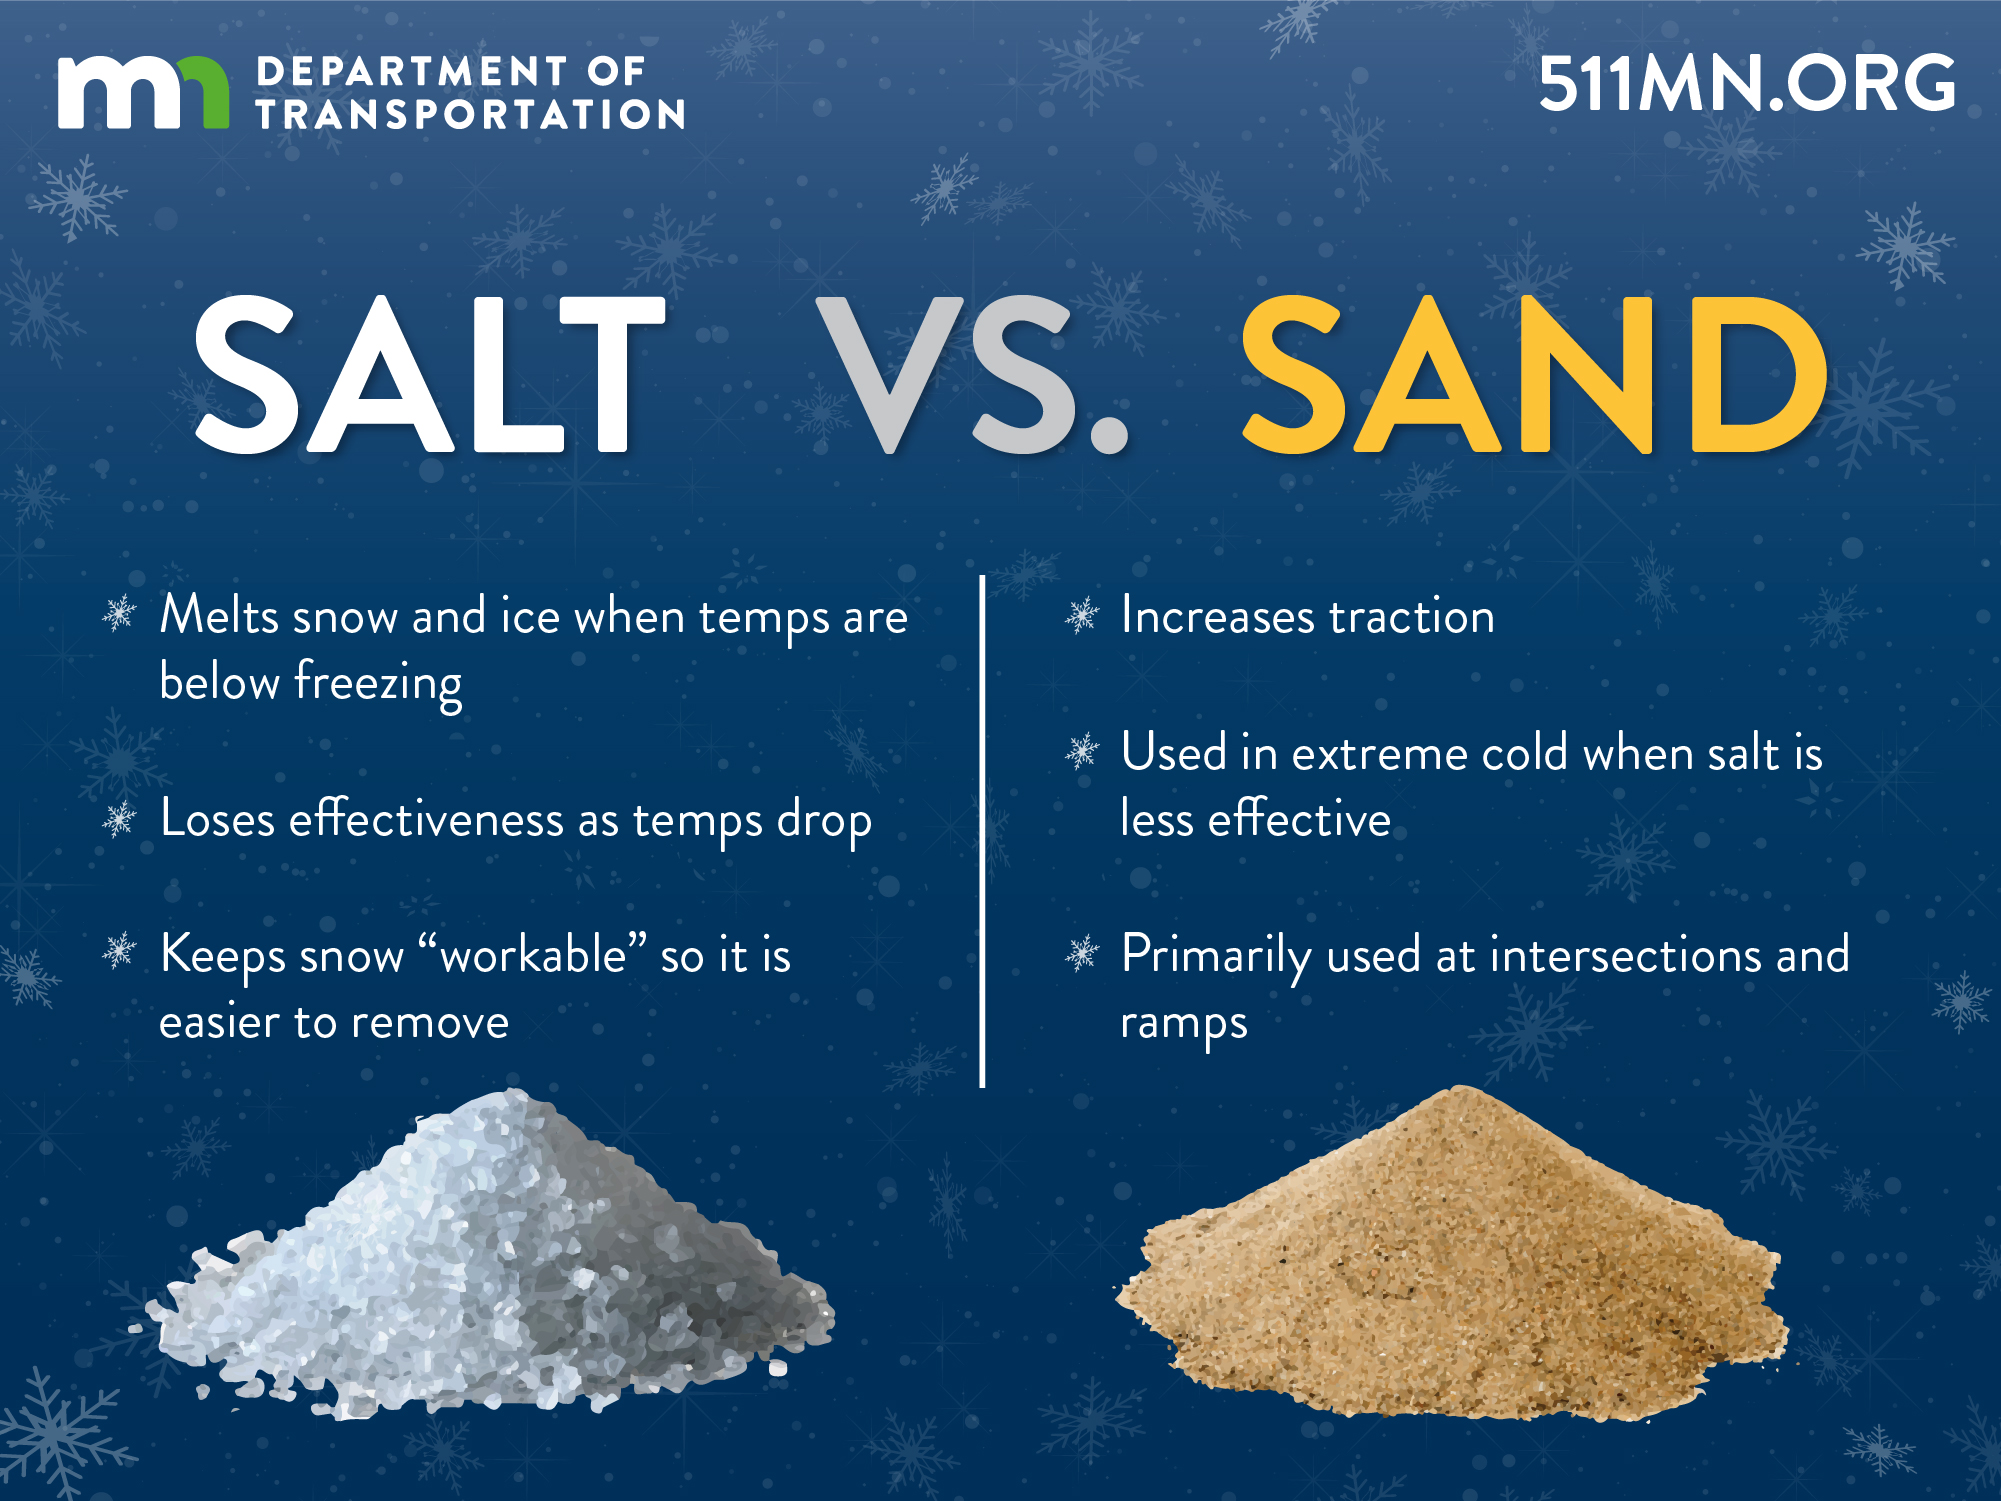 Salt melts snow and ice when temps are below freezing. Salt loses effectiveness as temps drop. Salt keeps snow "workable" so it is easier to remove. Sand increases traction. Sand used in extreme cold when salt is less effective. Sand primarily used at intersections and ramps.